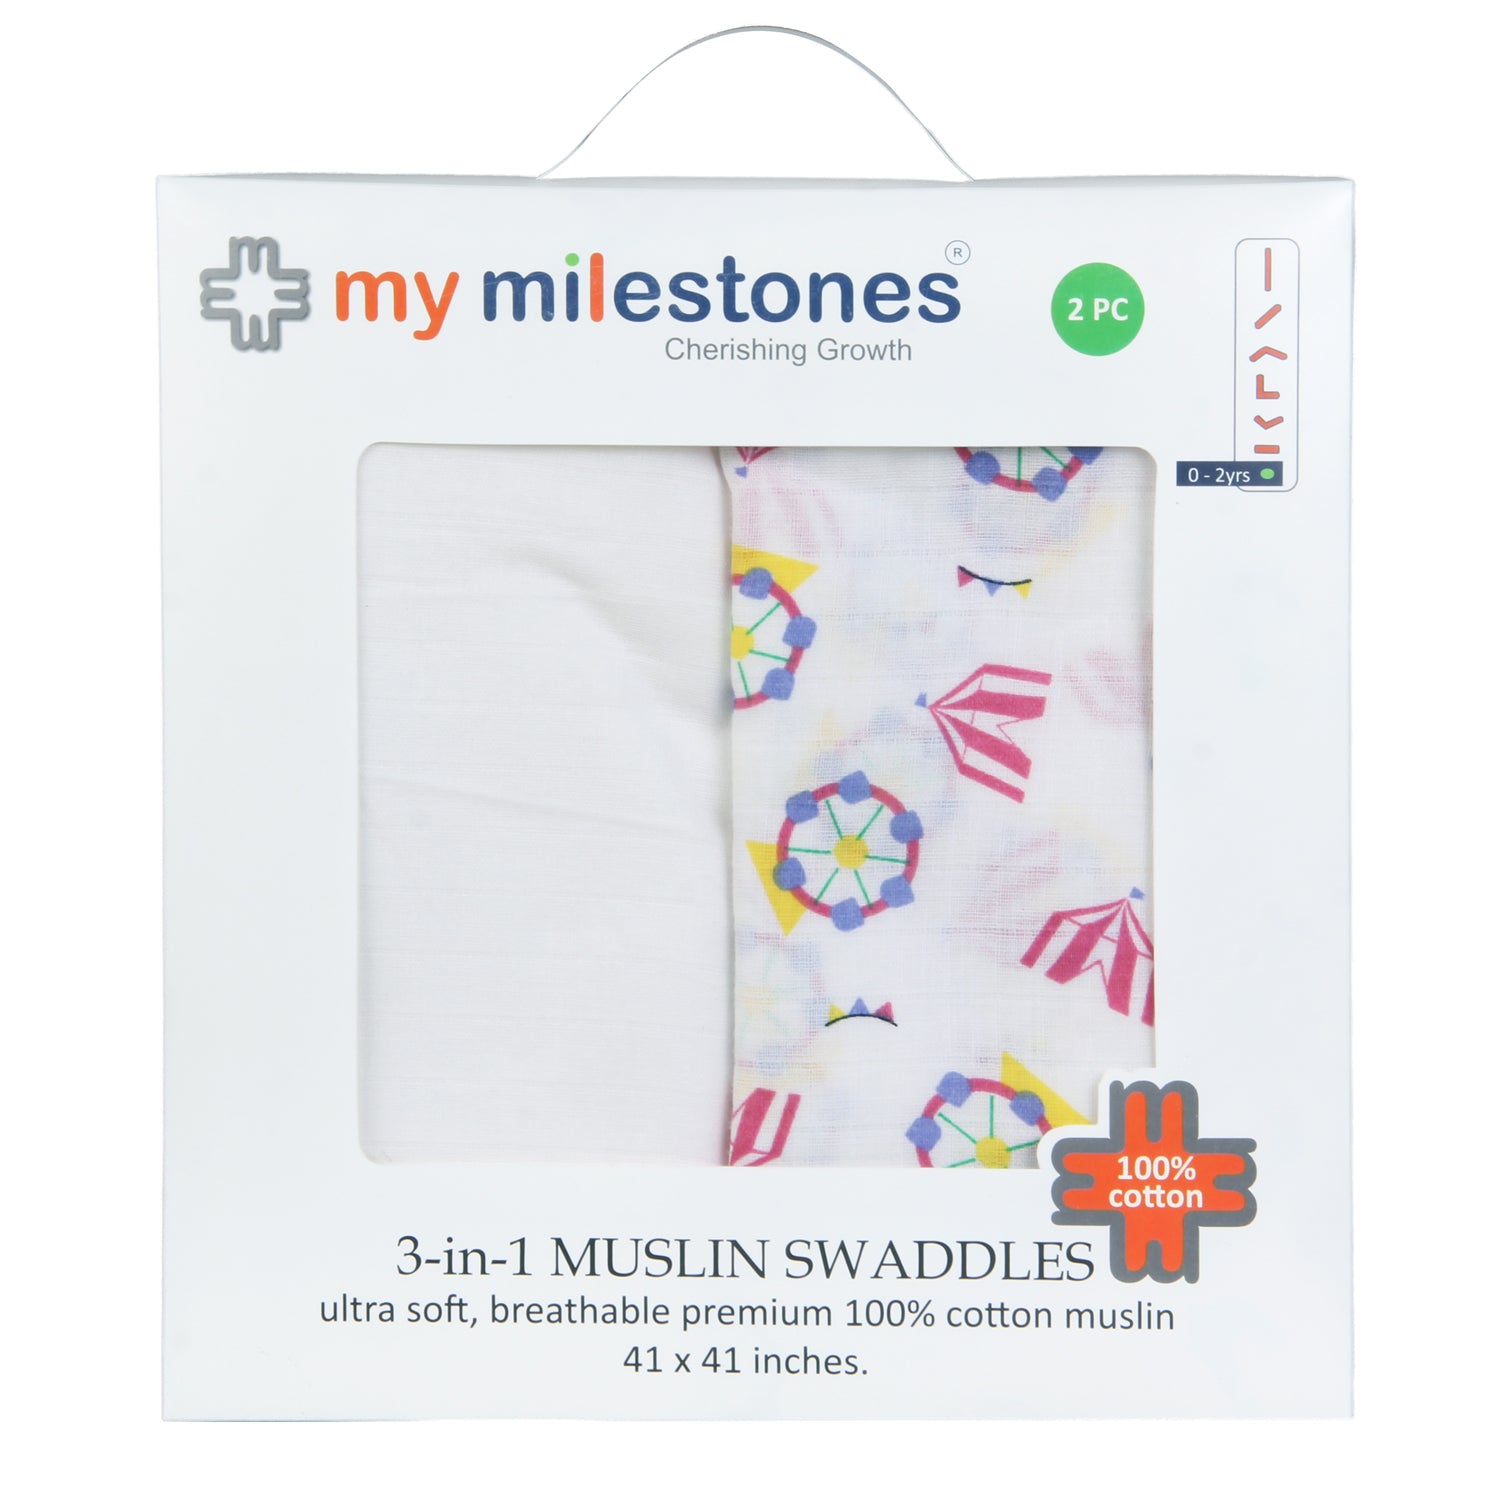 My Milestones 100% Cotton 3 In 1 Muslin Double Cloth (2 Layers) Baby Swaddle Wrapper - Pack Of 2 - Carnival Rose Pink